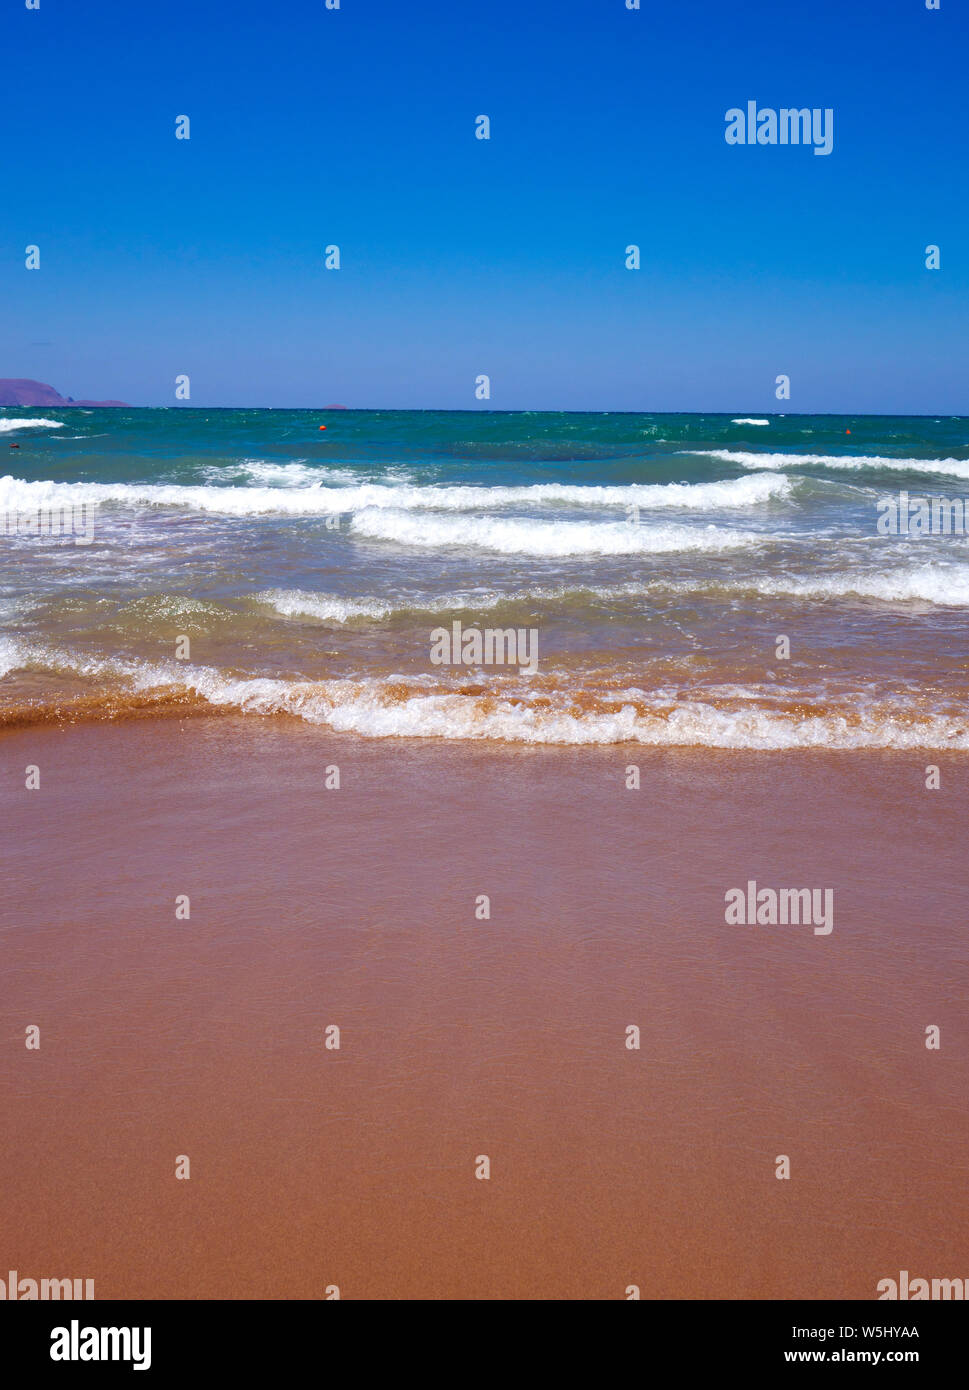 waves lapping onto a beach Stock Photo